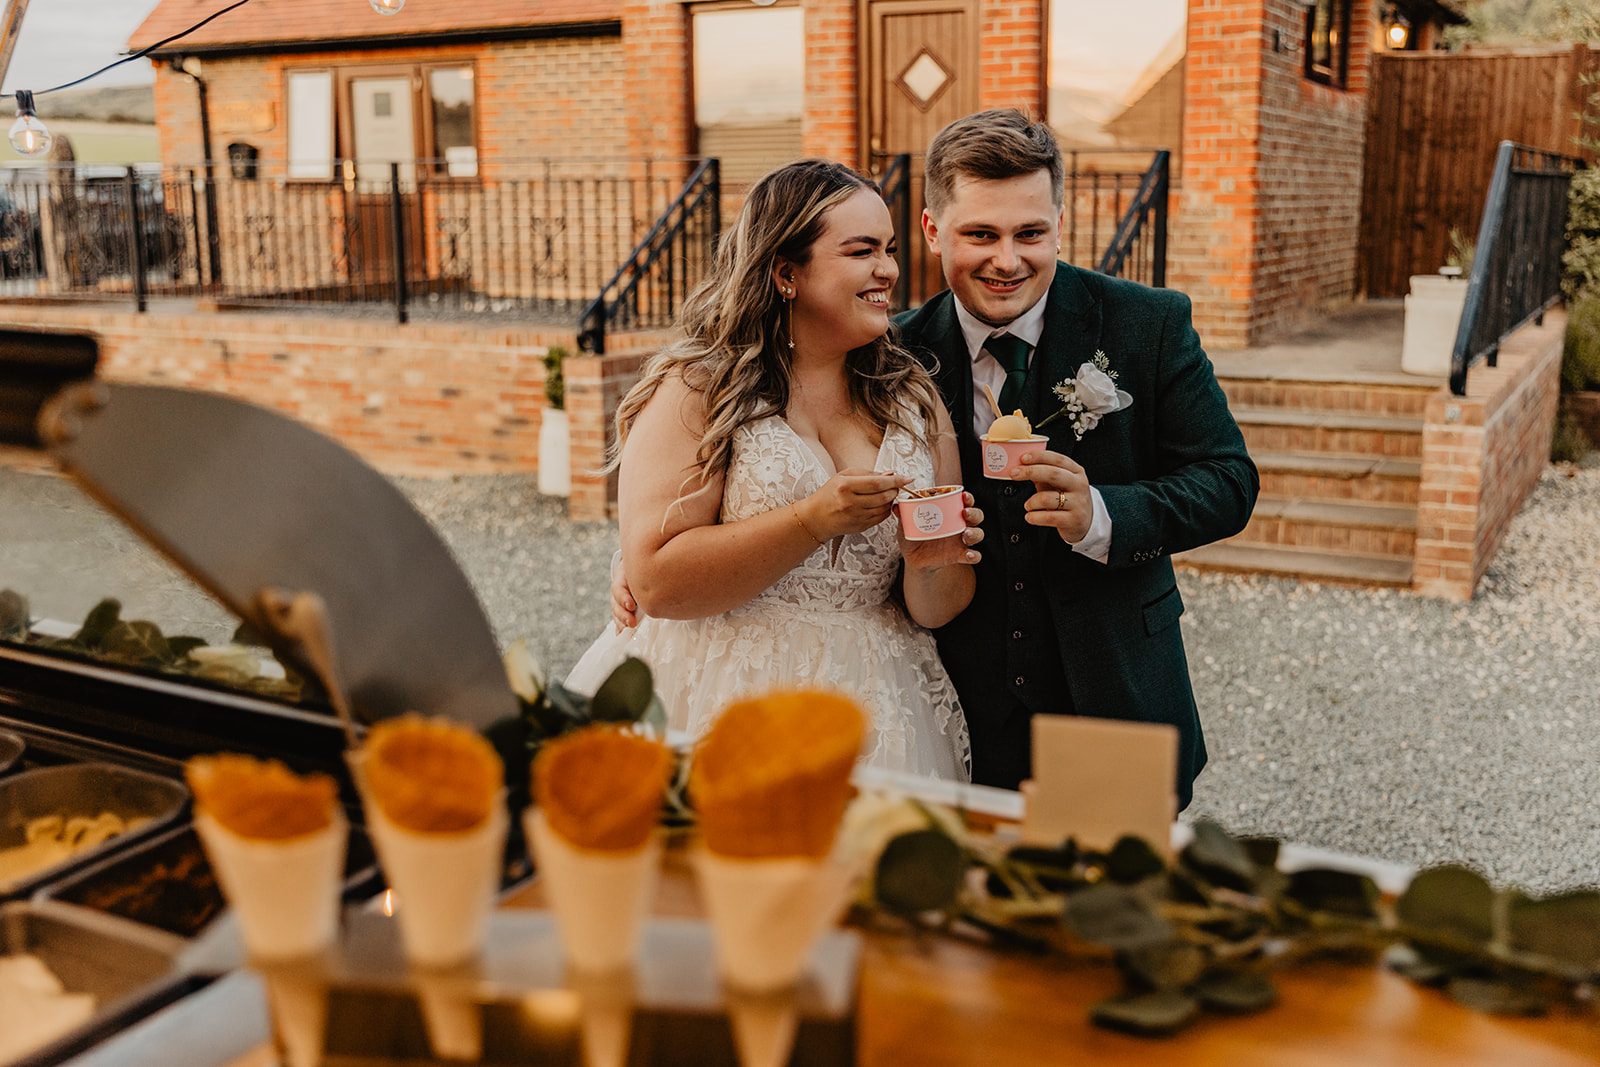 Bride and Groom eat ice cream at a Long Furlong Barn Wedding in Worthing, Sussex. By Olive Joy Photography.